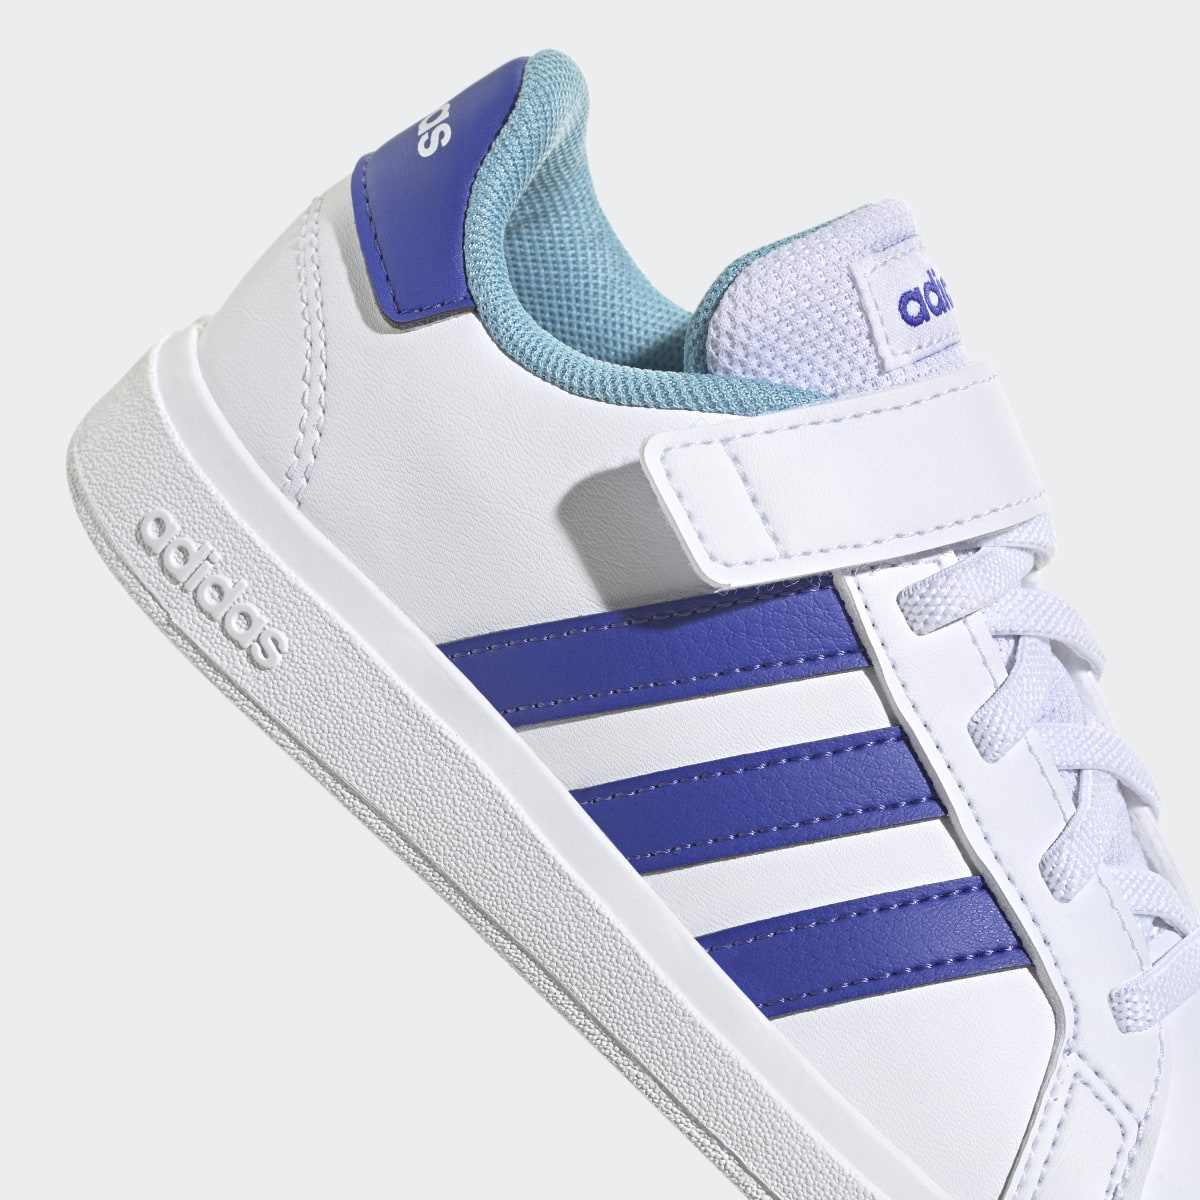 Adidas Grand Court Elastic Lace and Top Strap Ayakkabı. 10